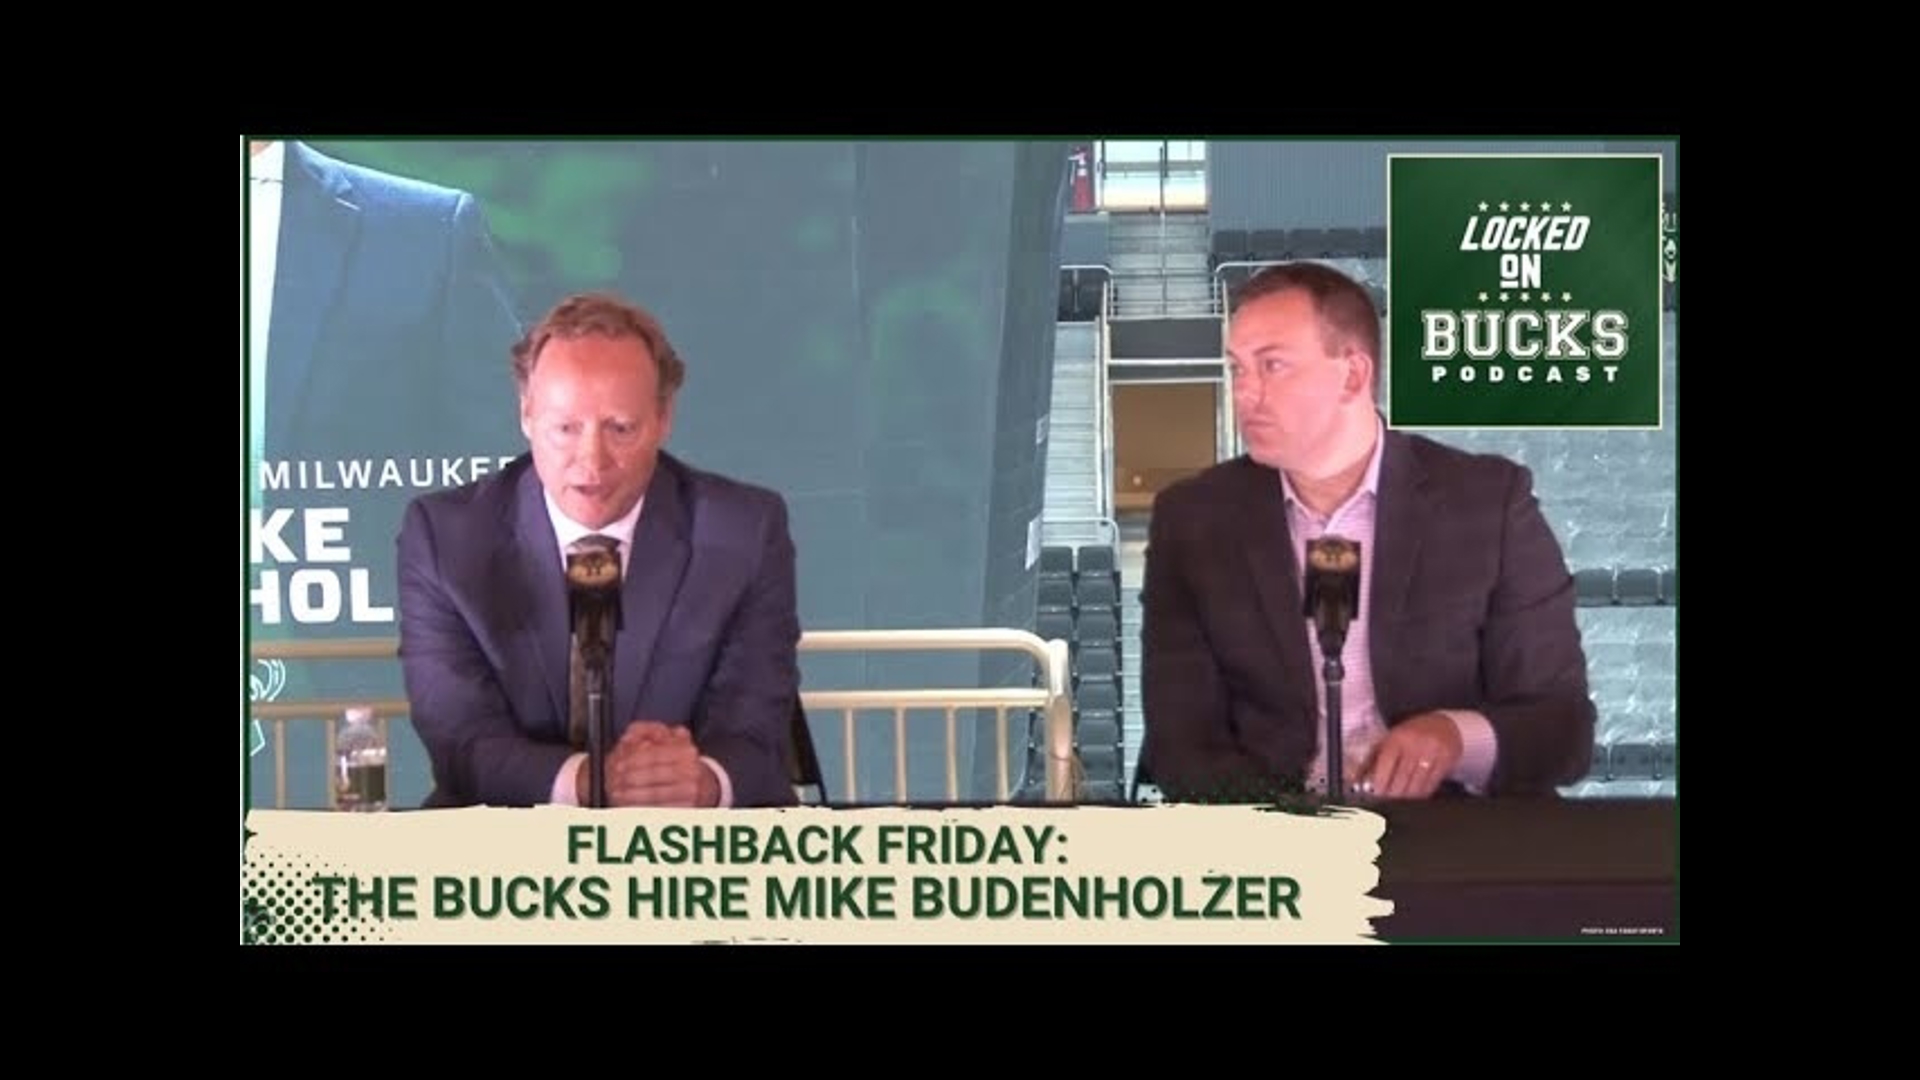 Justin and Camille kick off the flashback Friday series by taking a look back at the hire that changed everything  for the Bucks.  Mike Budenolzer.